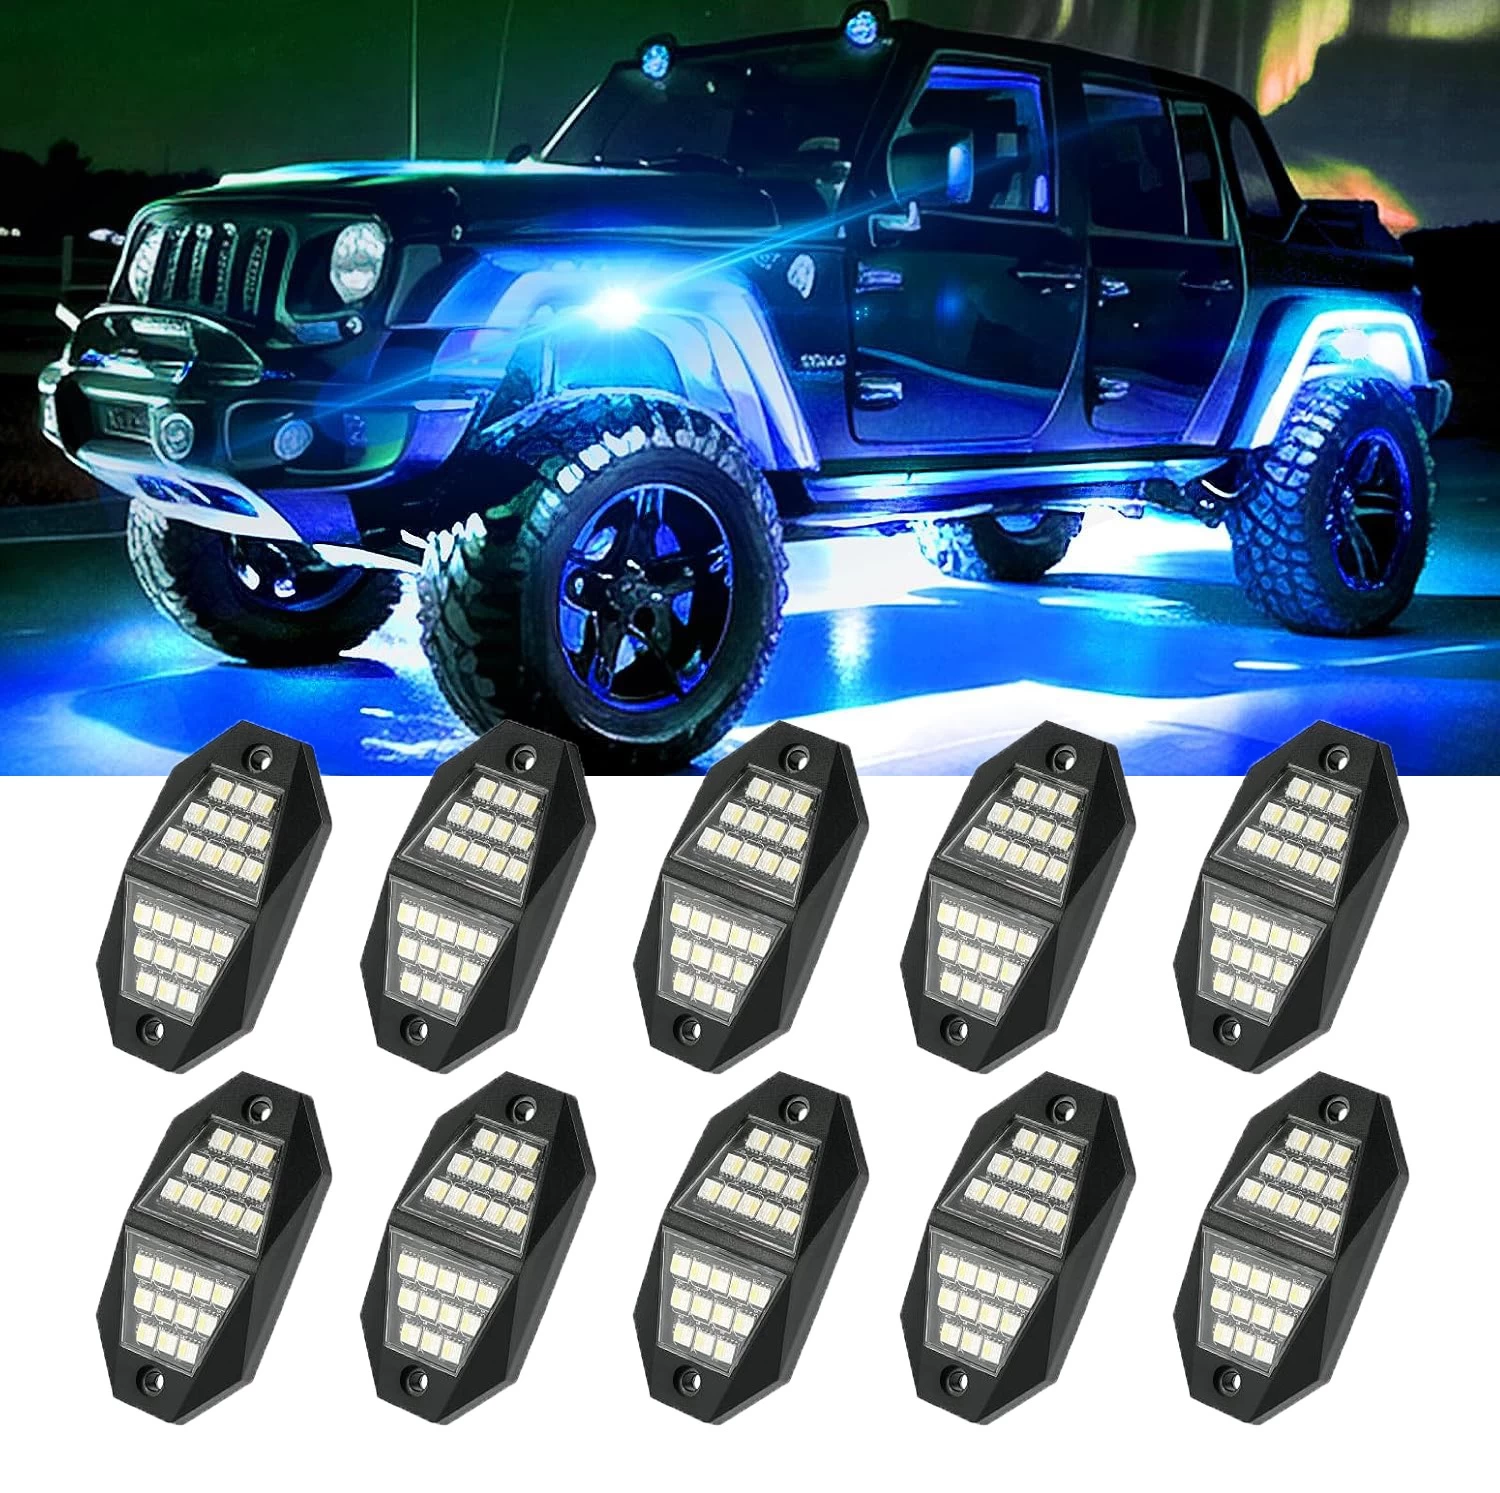 Çin 5 Sides LED Rock Lights 8 Pods Multicolor Underglow Lights for Trucks with App Control Flashing Music Mode RGB Rock Lights for Boat SUV Car Accessories - COPY - lf3jlu üretici firma